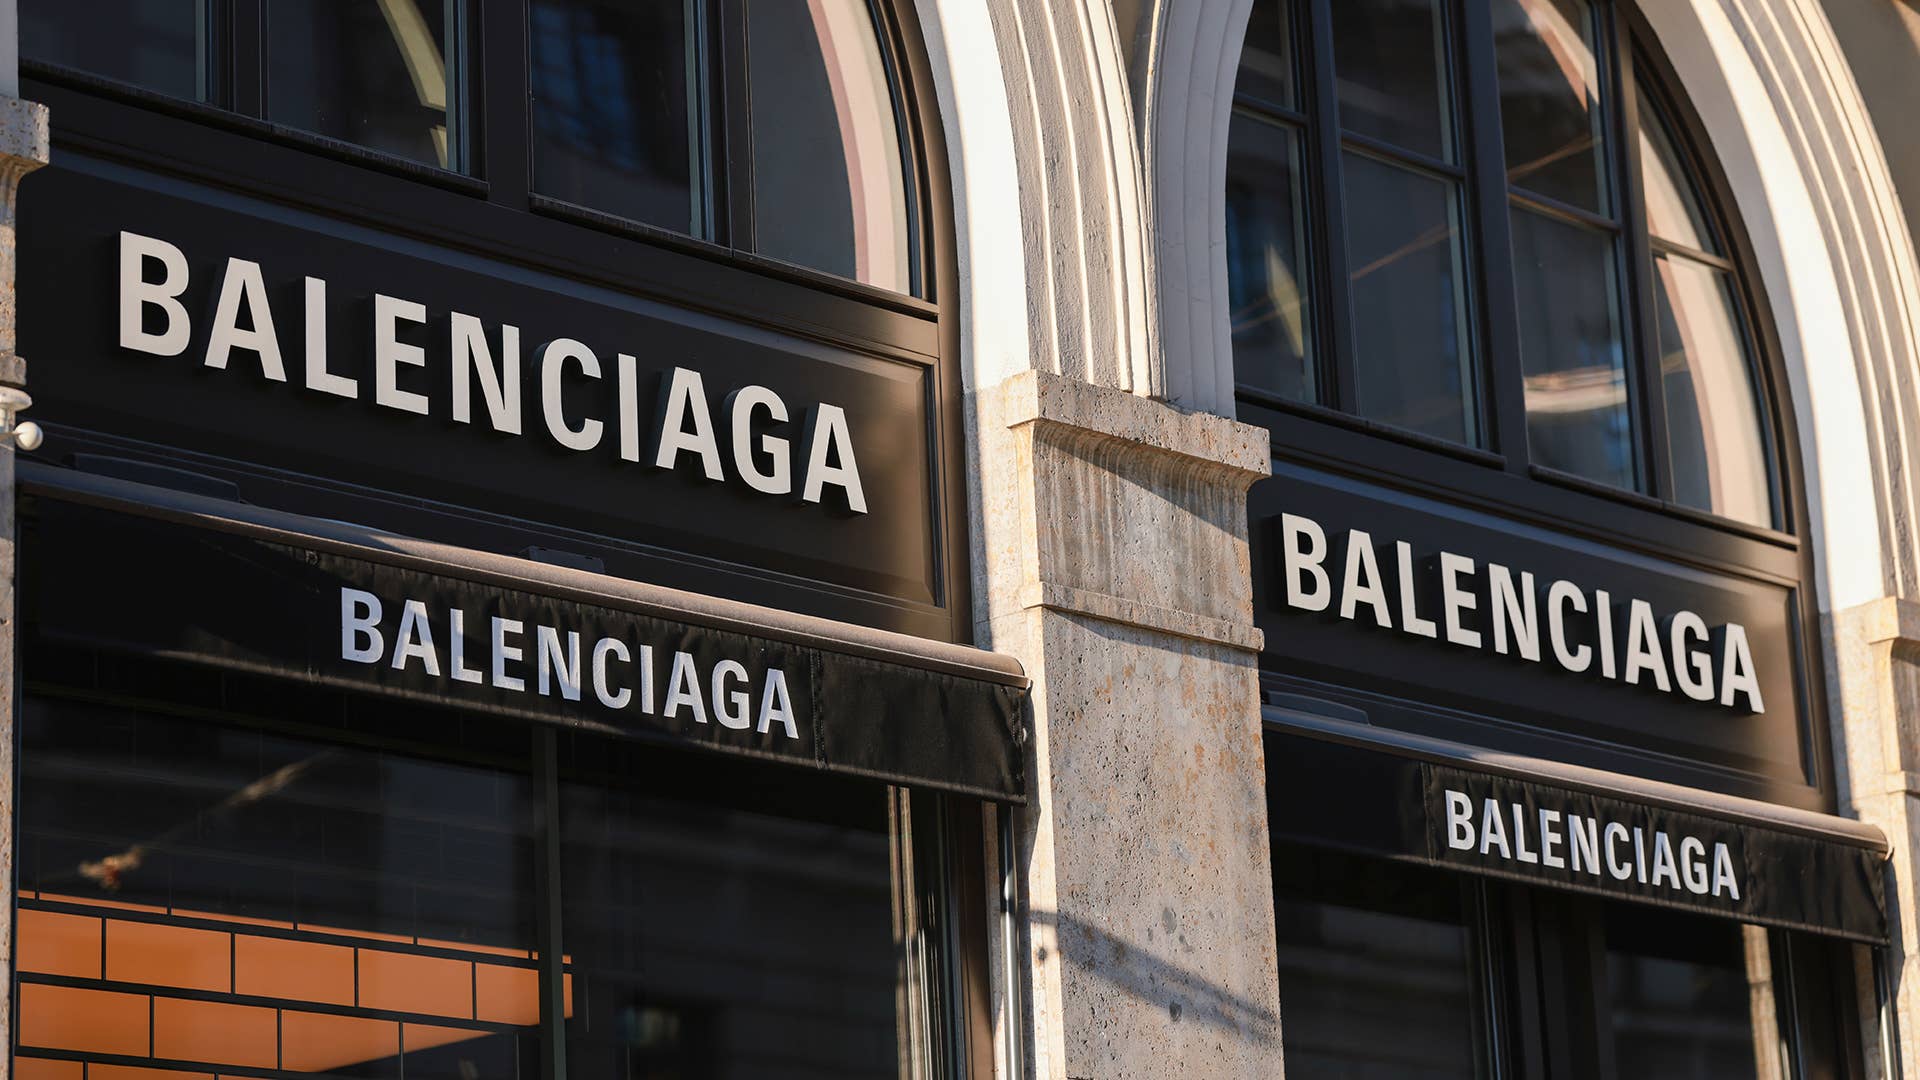 The exterior of a Balenciaga store photographed on March 22, 2022 in Munich